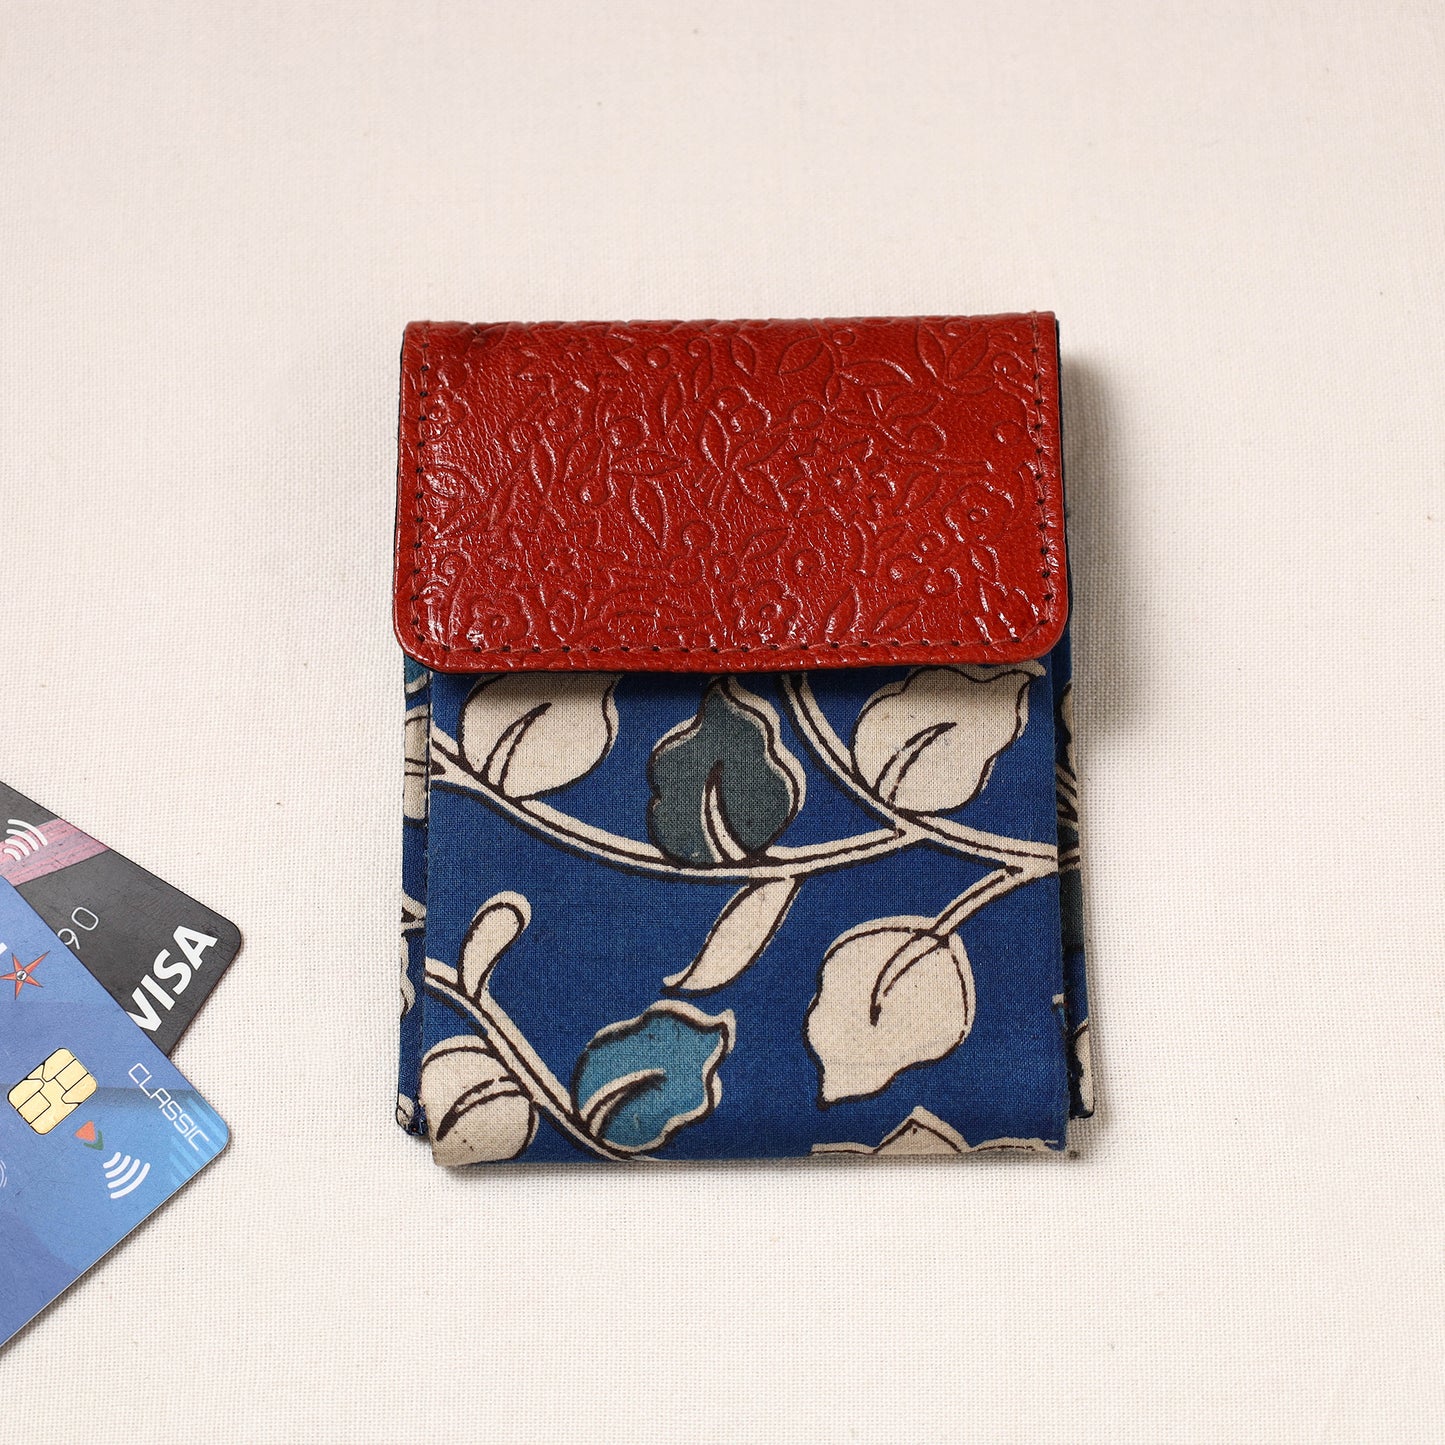 Handcrafted Kalamkari Fabric Card Holder with Embossed Leather Flap